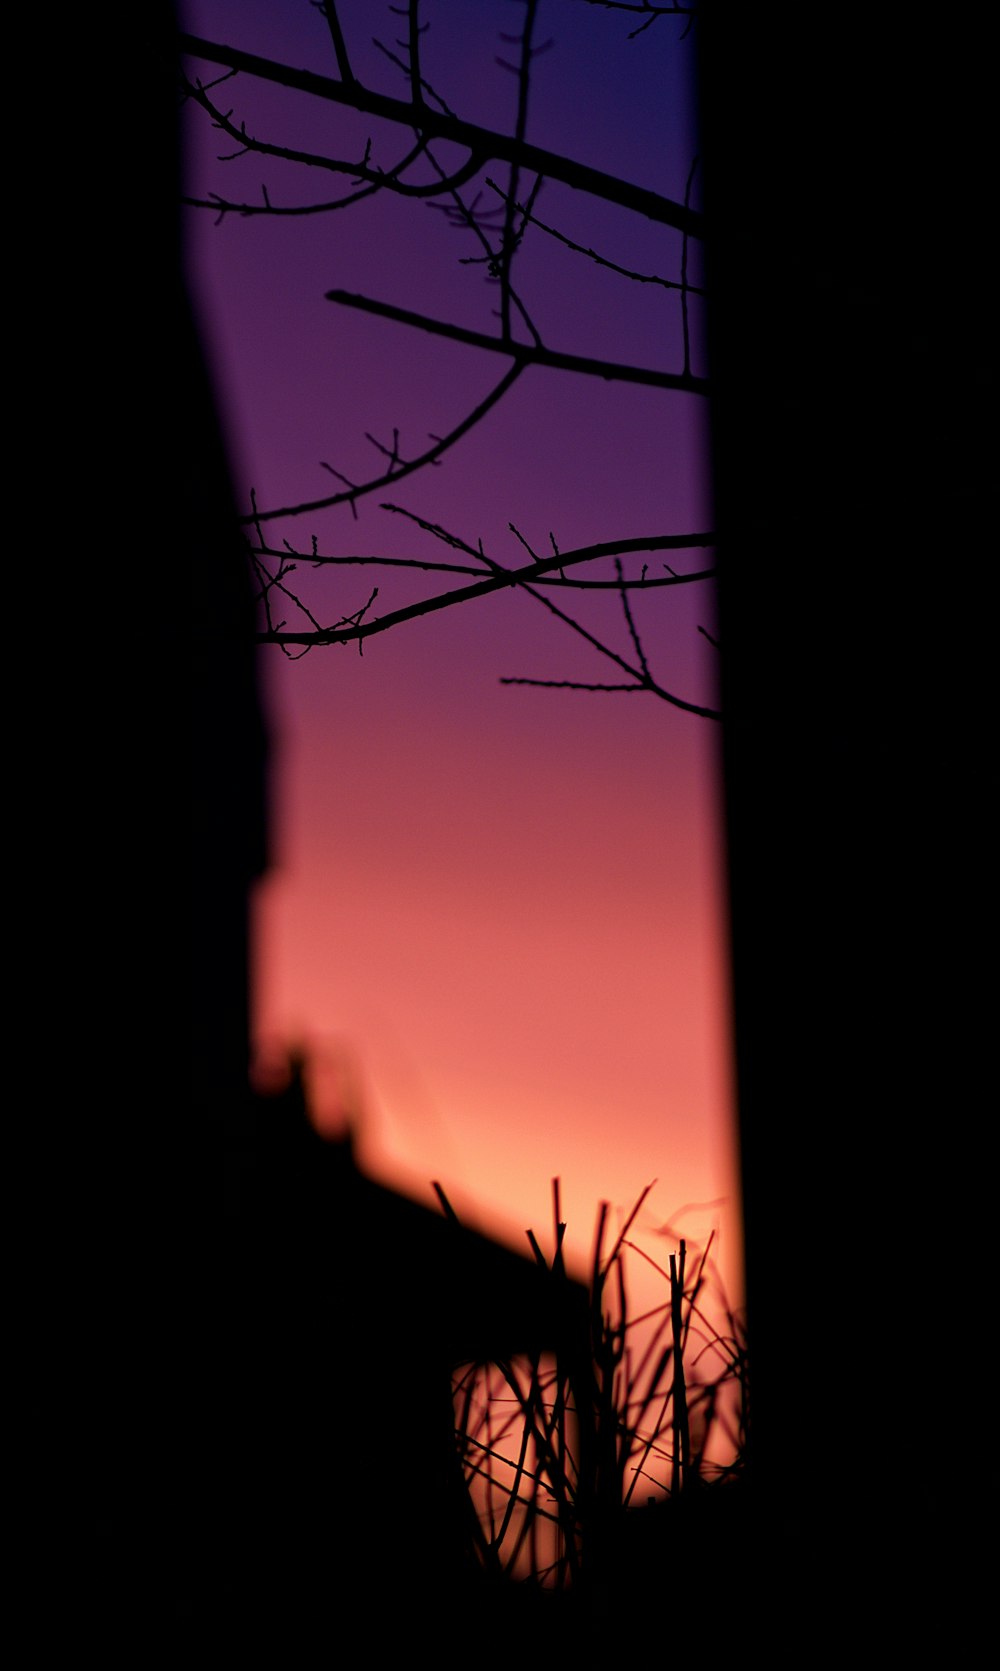 the silhouette of a tree against a purple sky